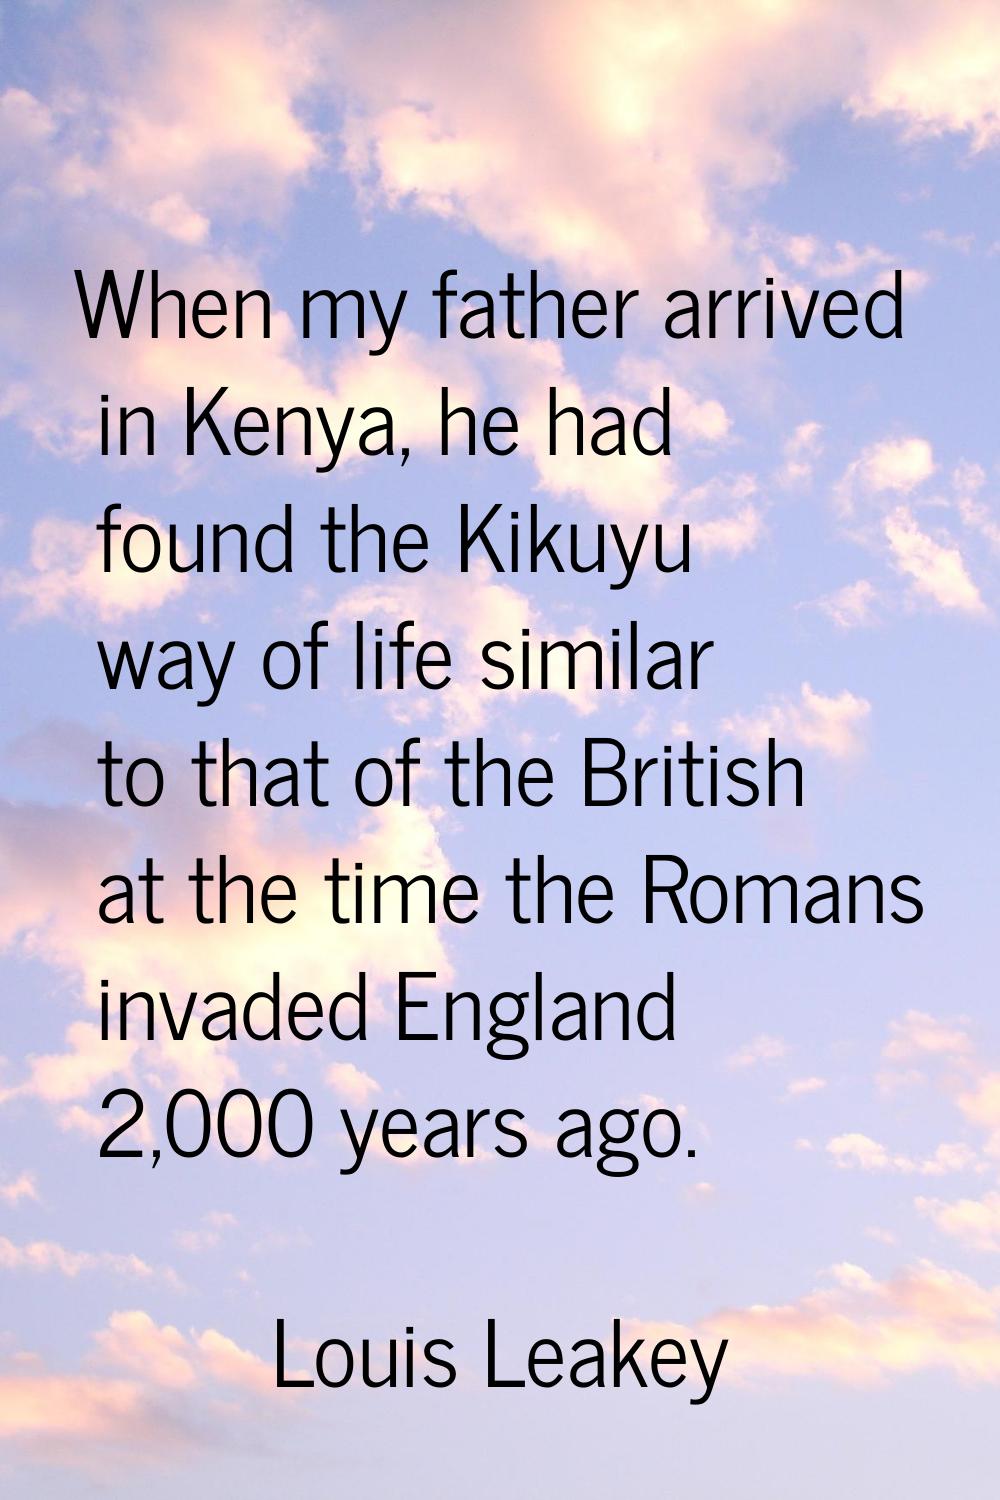 When my father arrived in Kenya, he had found the Kikuyu way of life similar to that of the British